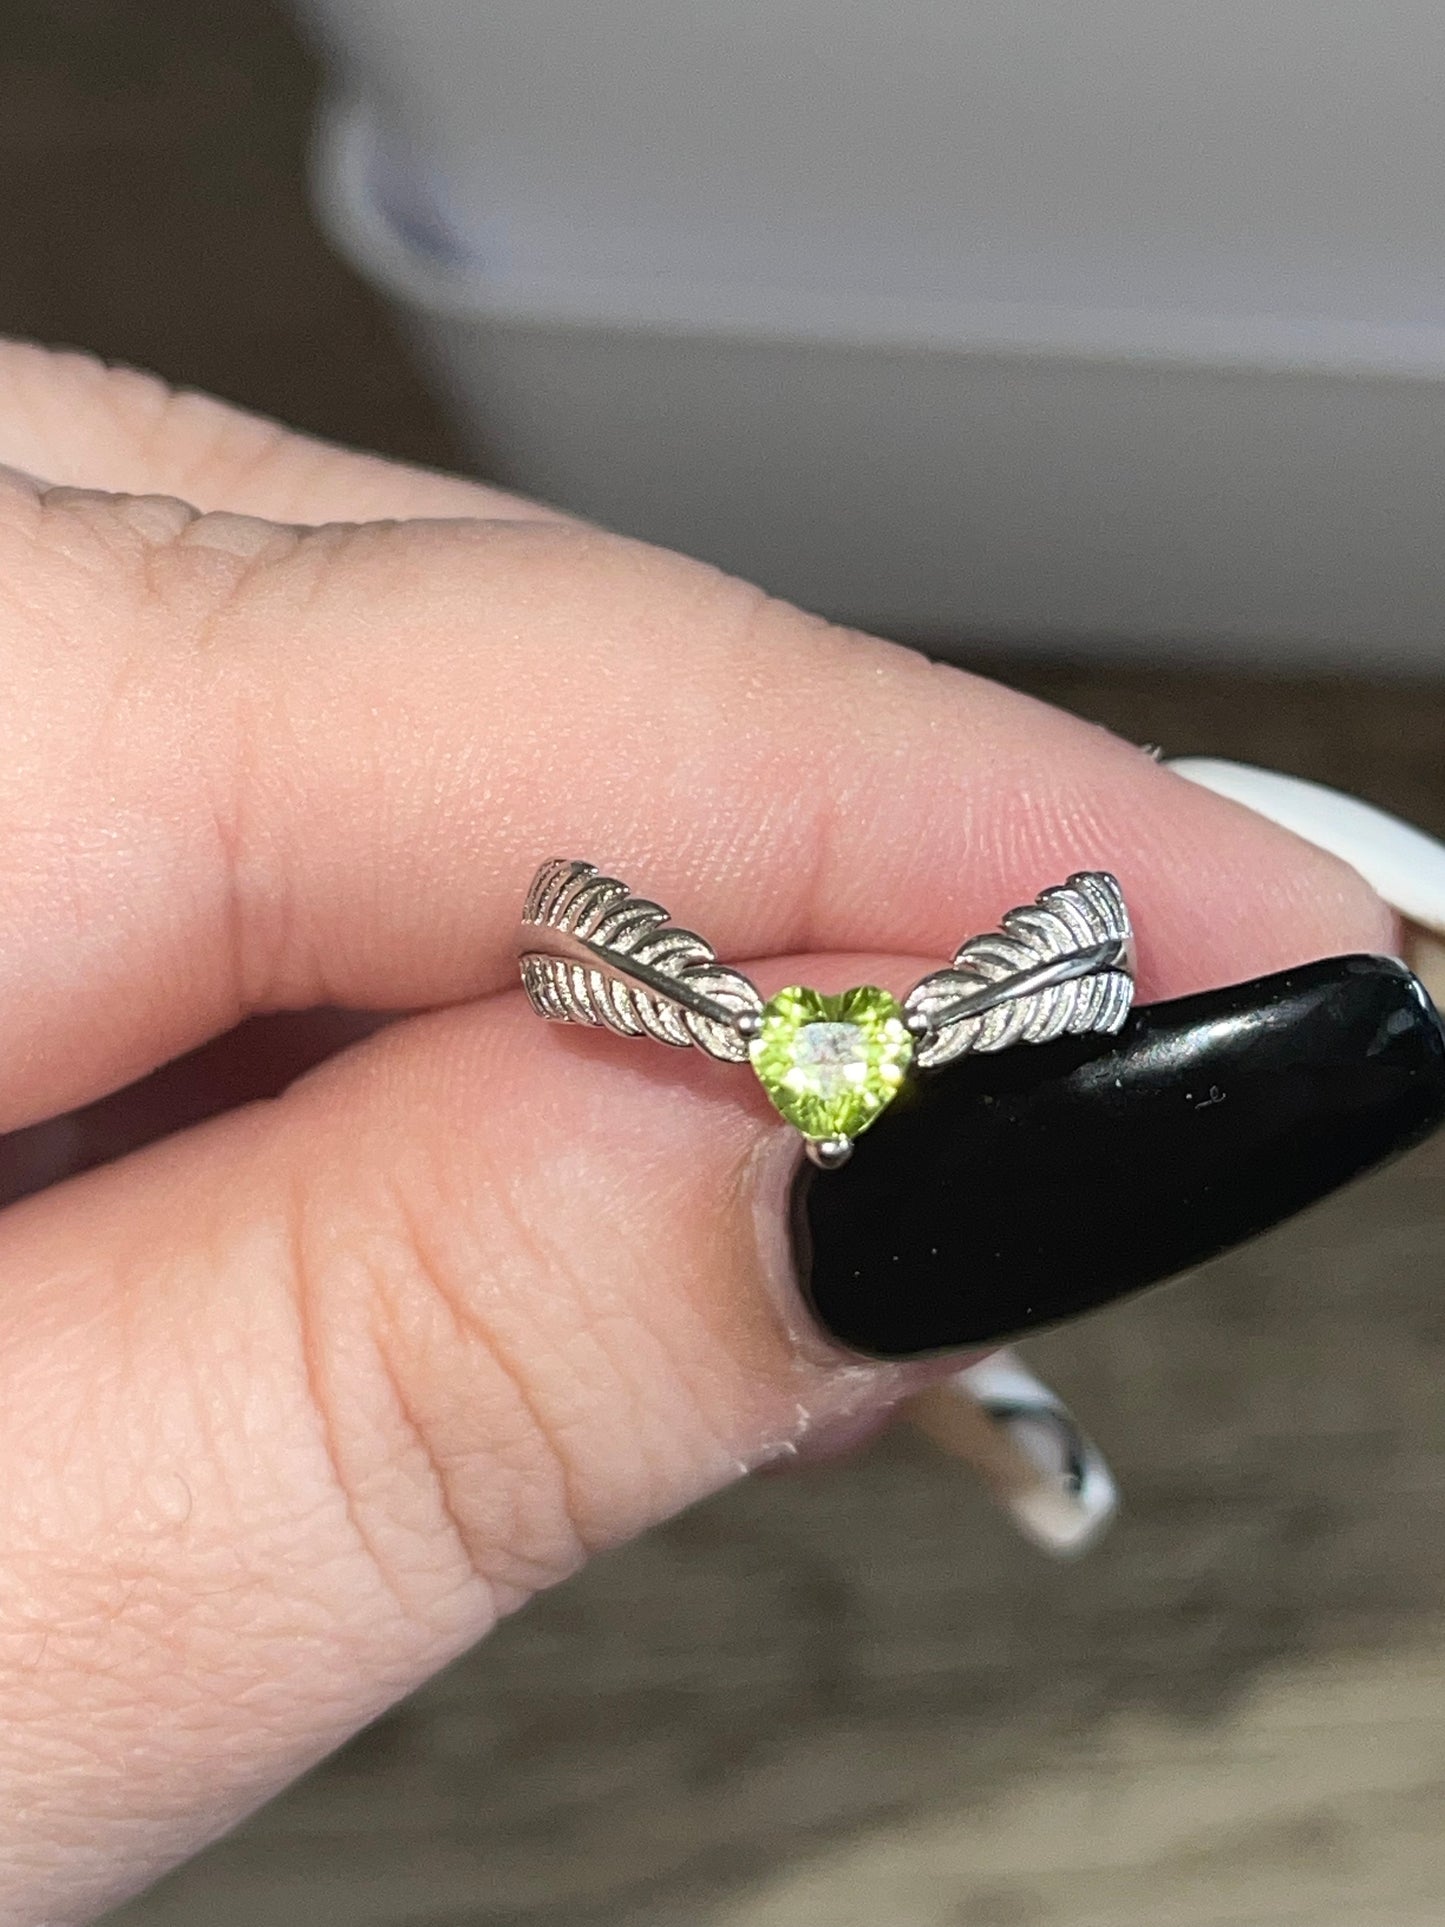 PERIDOT RING - Cleanses Toxins, Alleviates Jealousy/Greed, Opens Heart to Joy and New Relationships